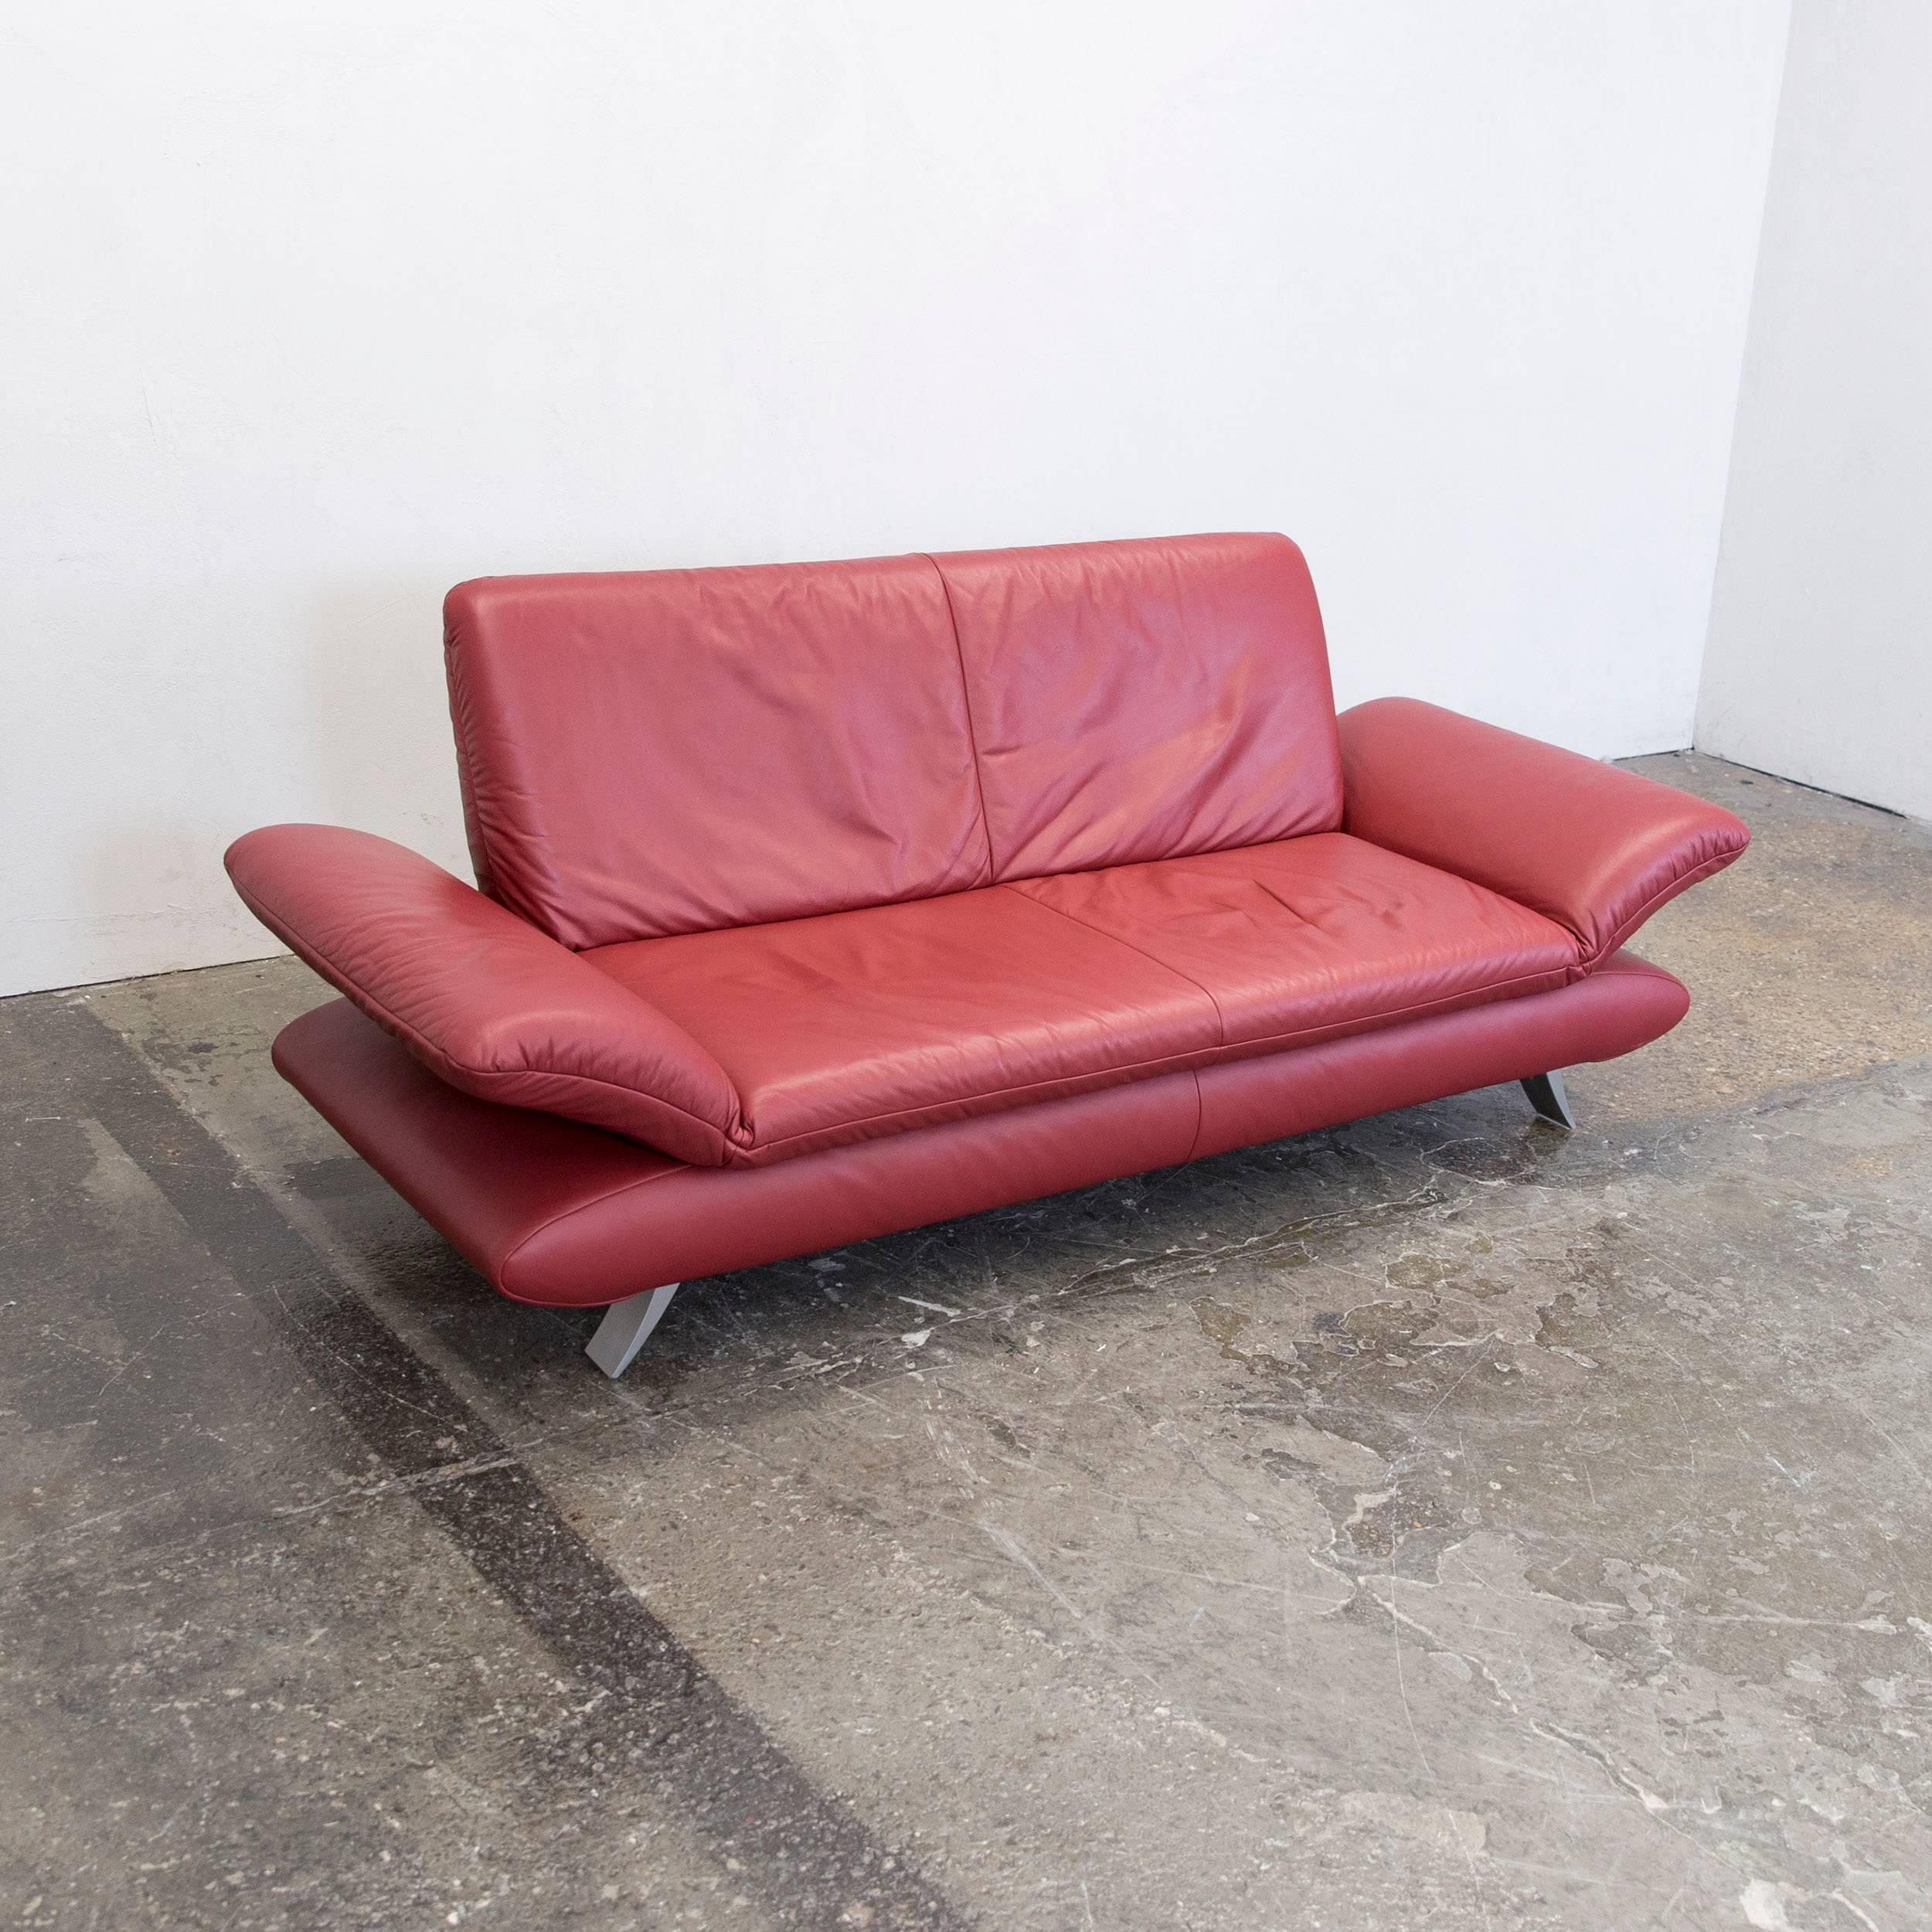 Koinor Rossini Designer Sofa Red Full Leather Three-Seat Function Modern In Good Condition For Sale In Cologne, DE